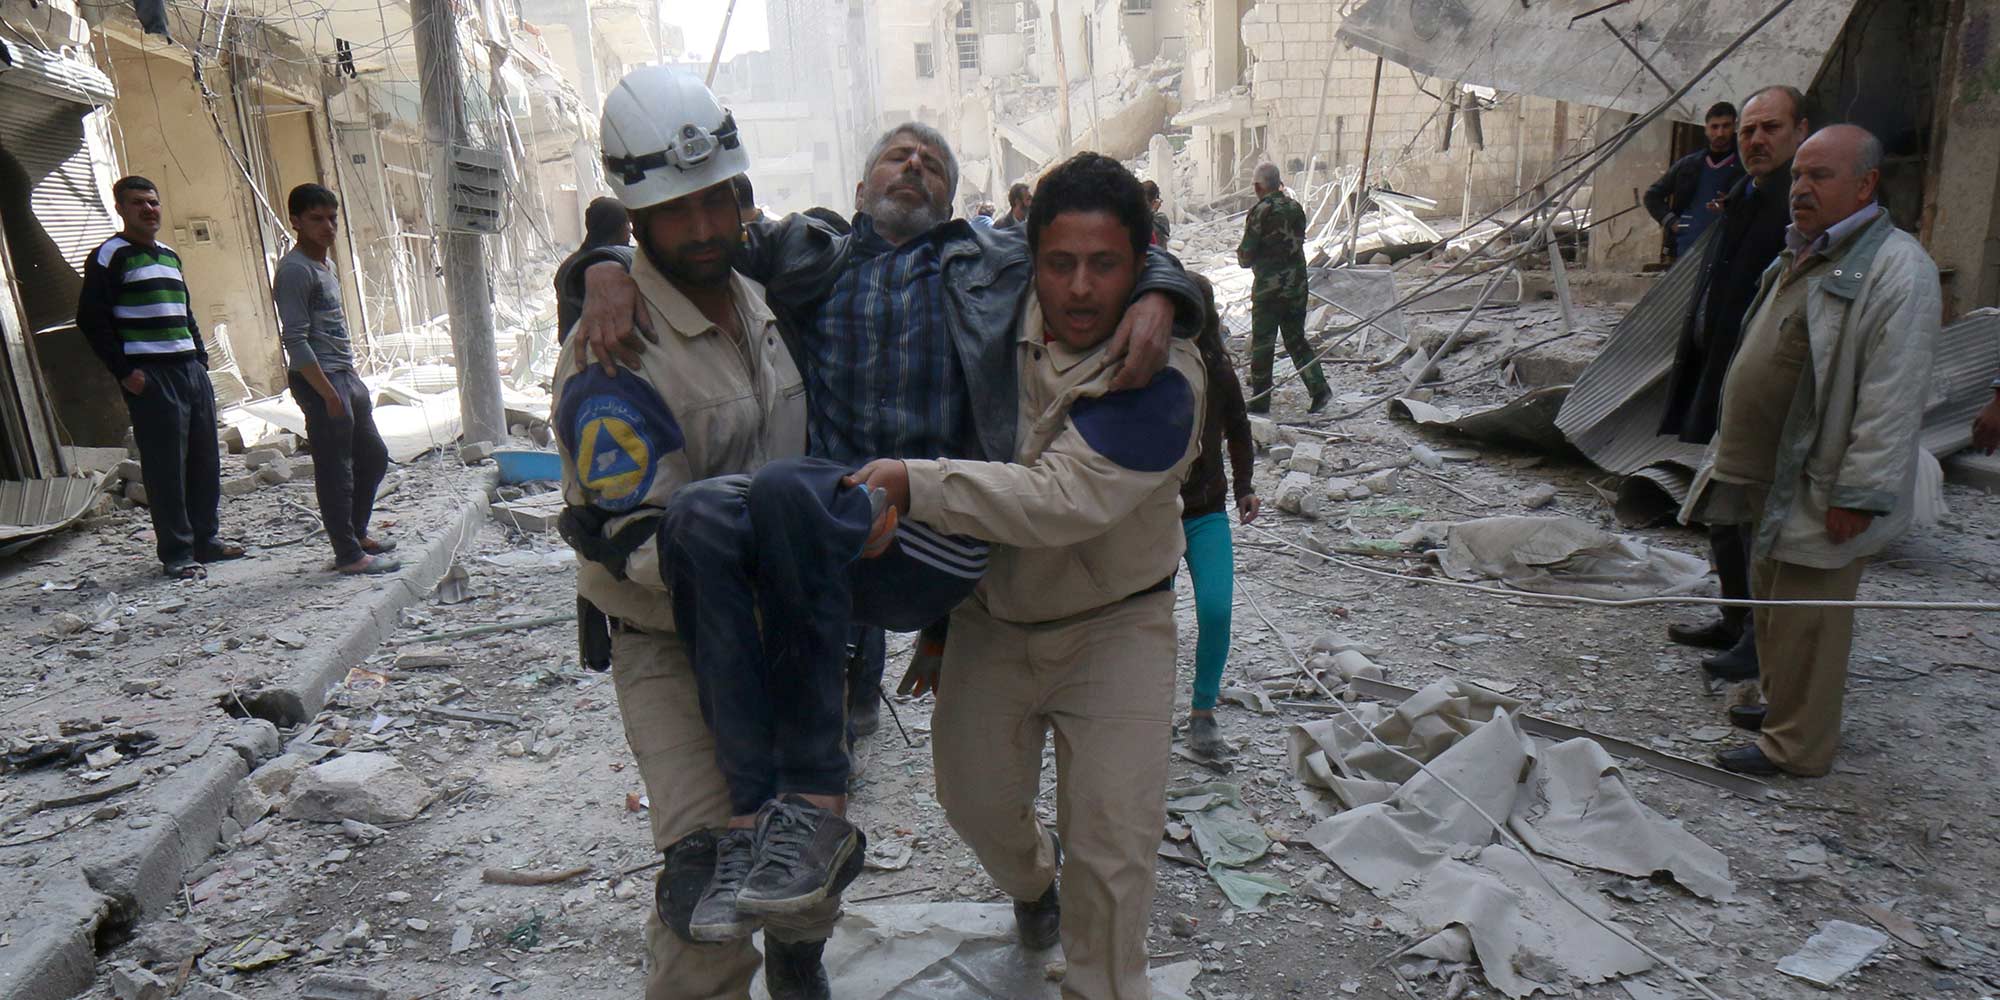 Emergency personnel carry an injured man following reported air strikes by government forces on Aleppo in March 2015